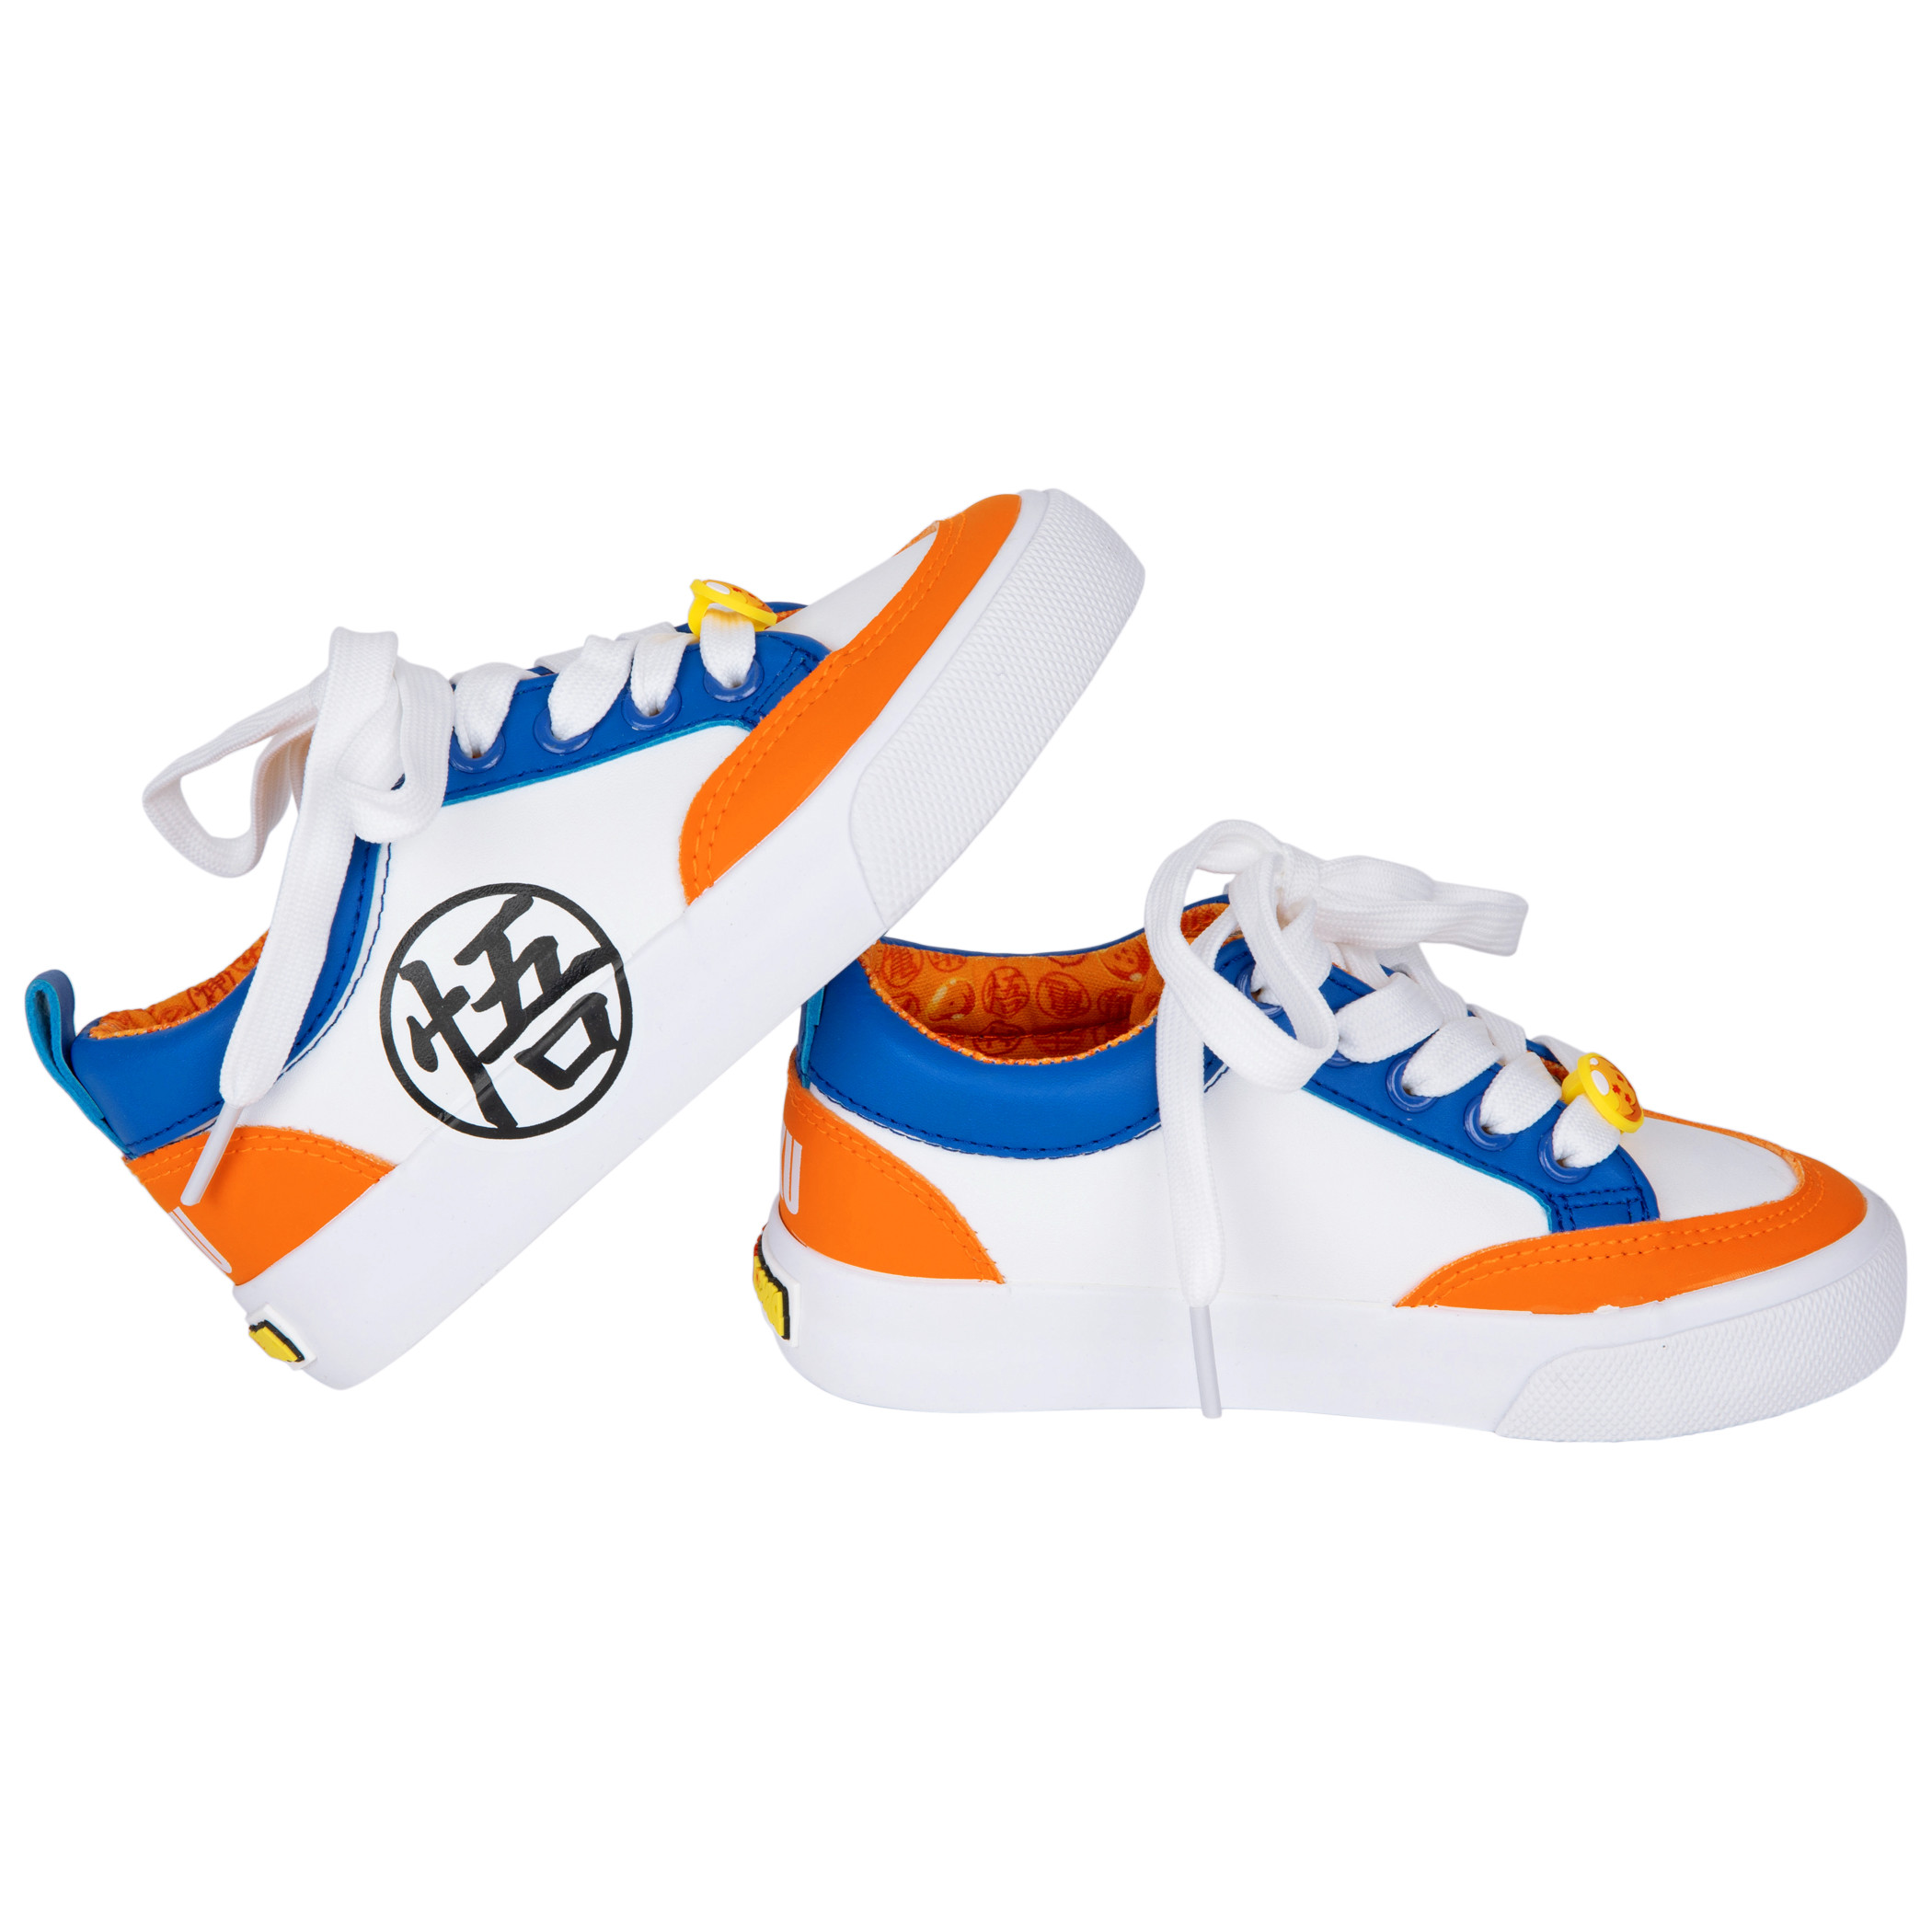 Dragon Ball Z Goku Gi Jumpsuit Styled Youth Shoes